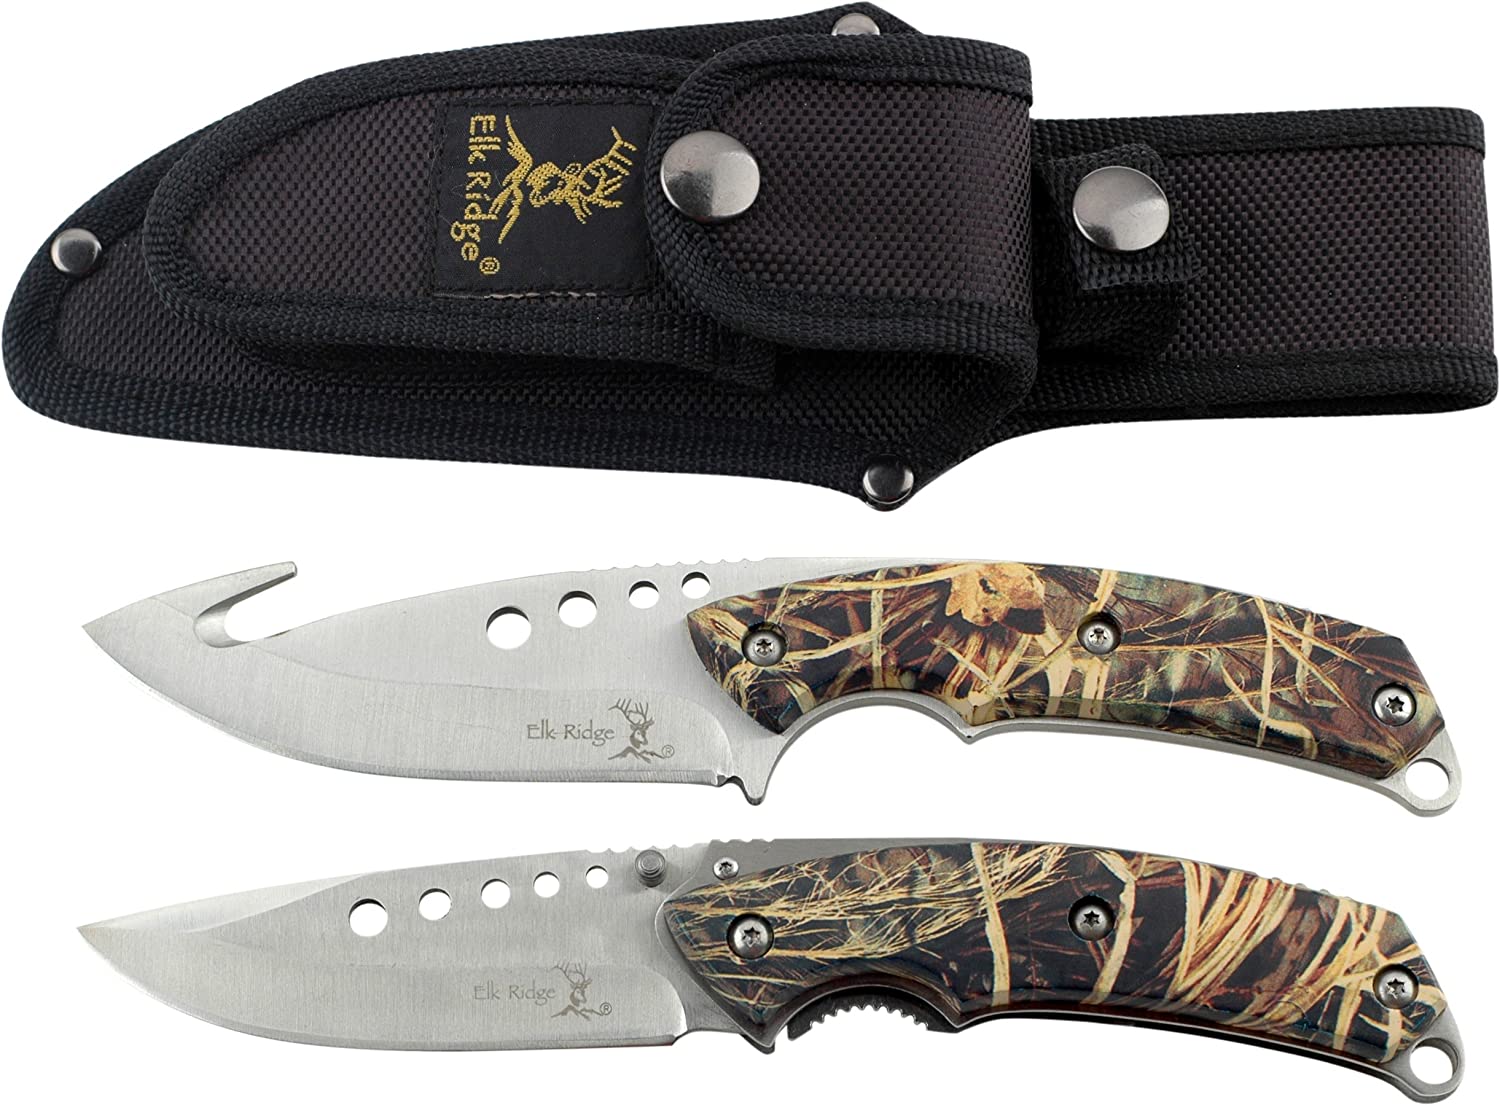 Elk Ridge – Outdoors Hunting Knife Set- 2 PC Fixed Blade and Folding Knife Set, Satin Finished Stainless Steel Blades, Camo Coated Handles, Includes Combo Nylon Sheath – Hunting, Camping, Survival – ER-054CA